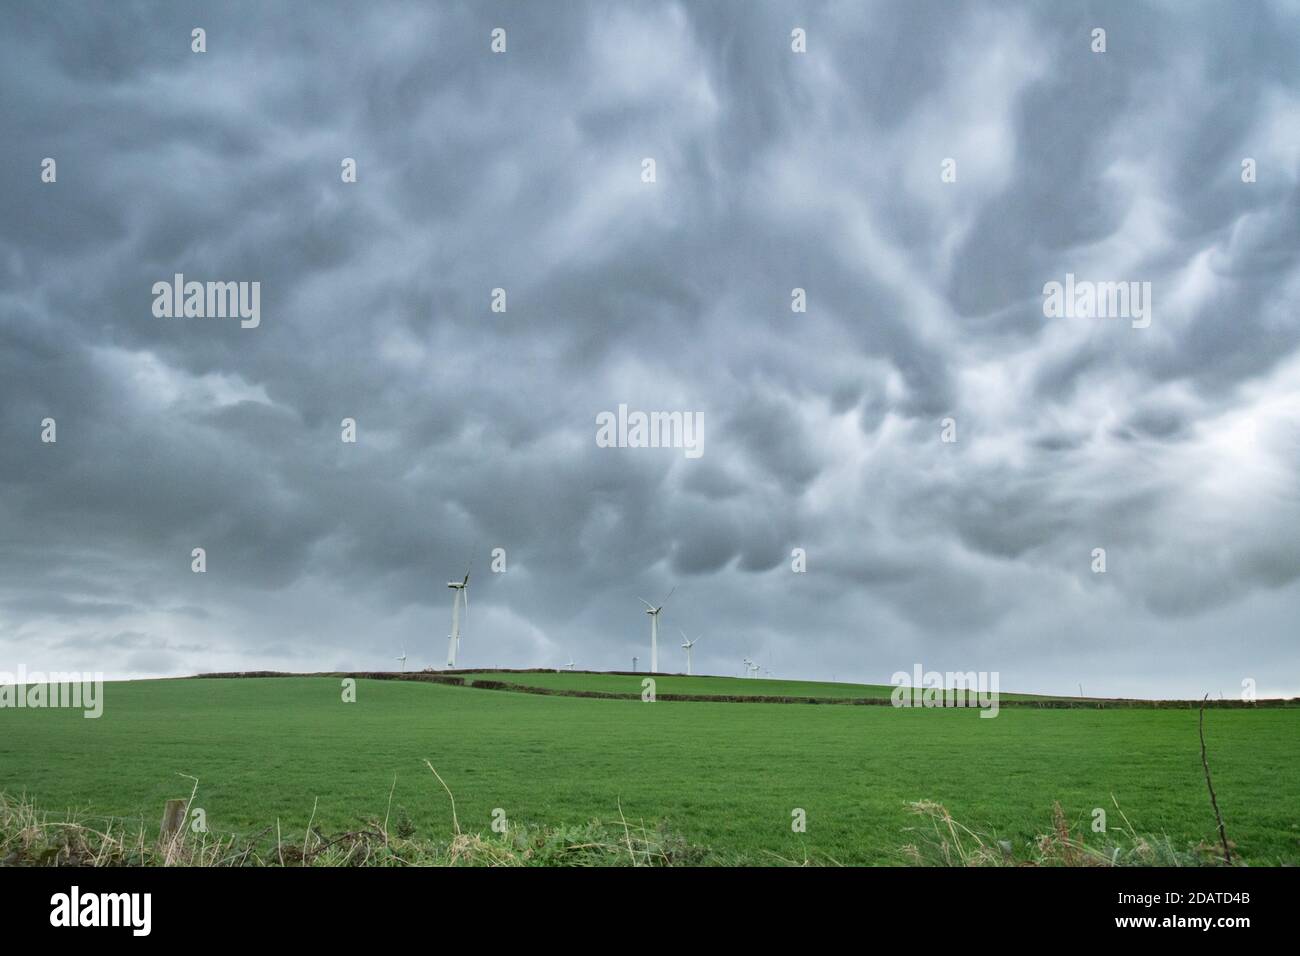 St Eval, Cornwall, UK. 15th November 2020. UK Weather. North Cornwall had a mix of sunshine and heavy rain this morning, as Mammutus clouds moved rapidly across the sky this morning.  Credit CWPIX / Alamy Live News. Stock Photo